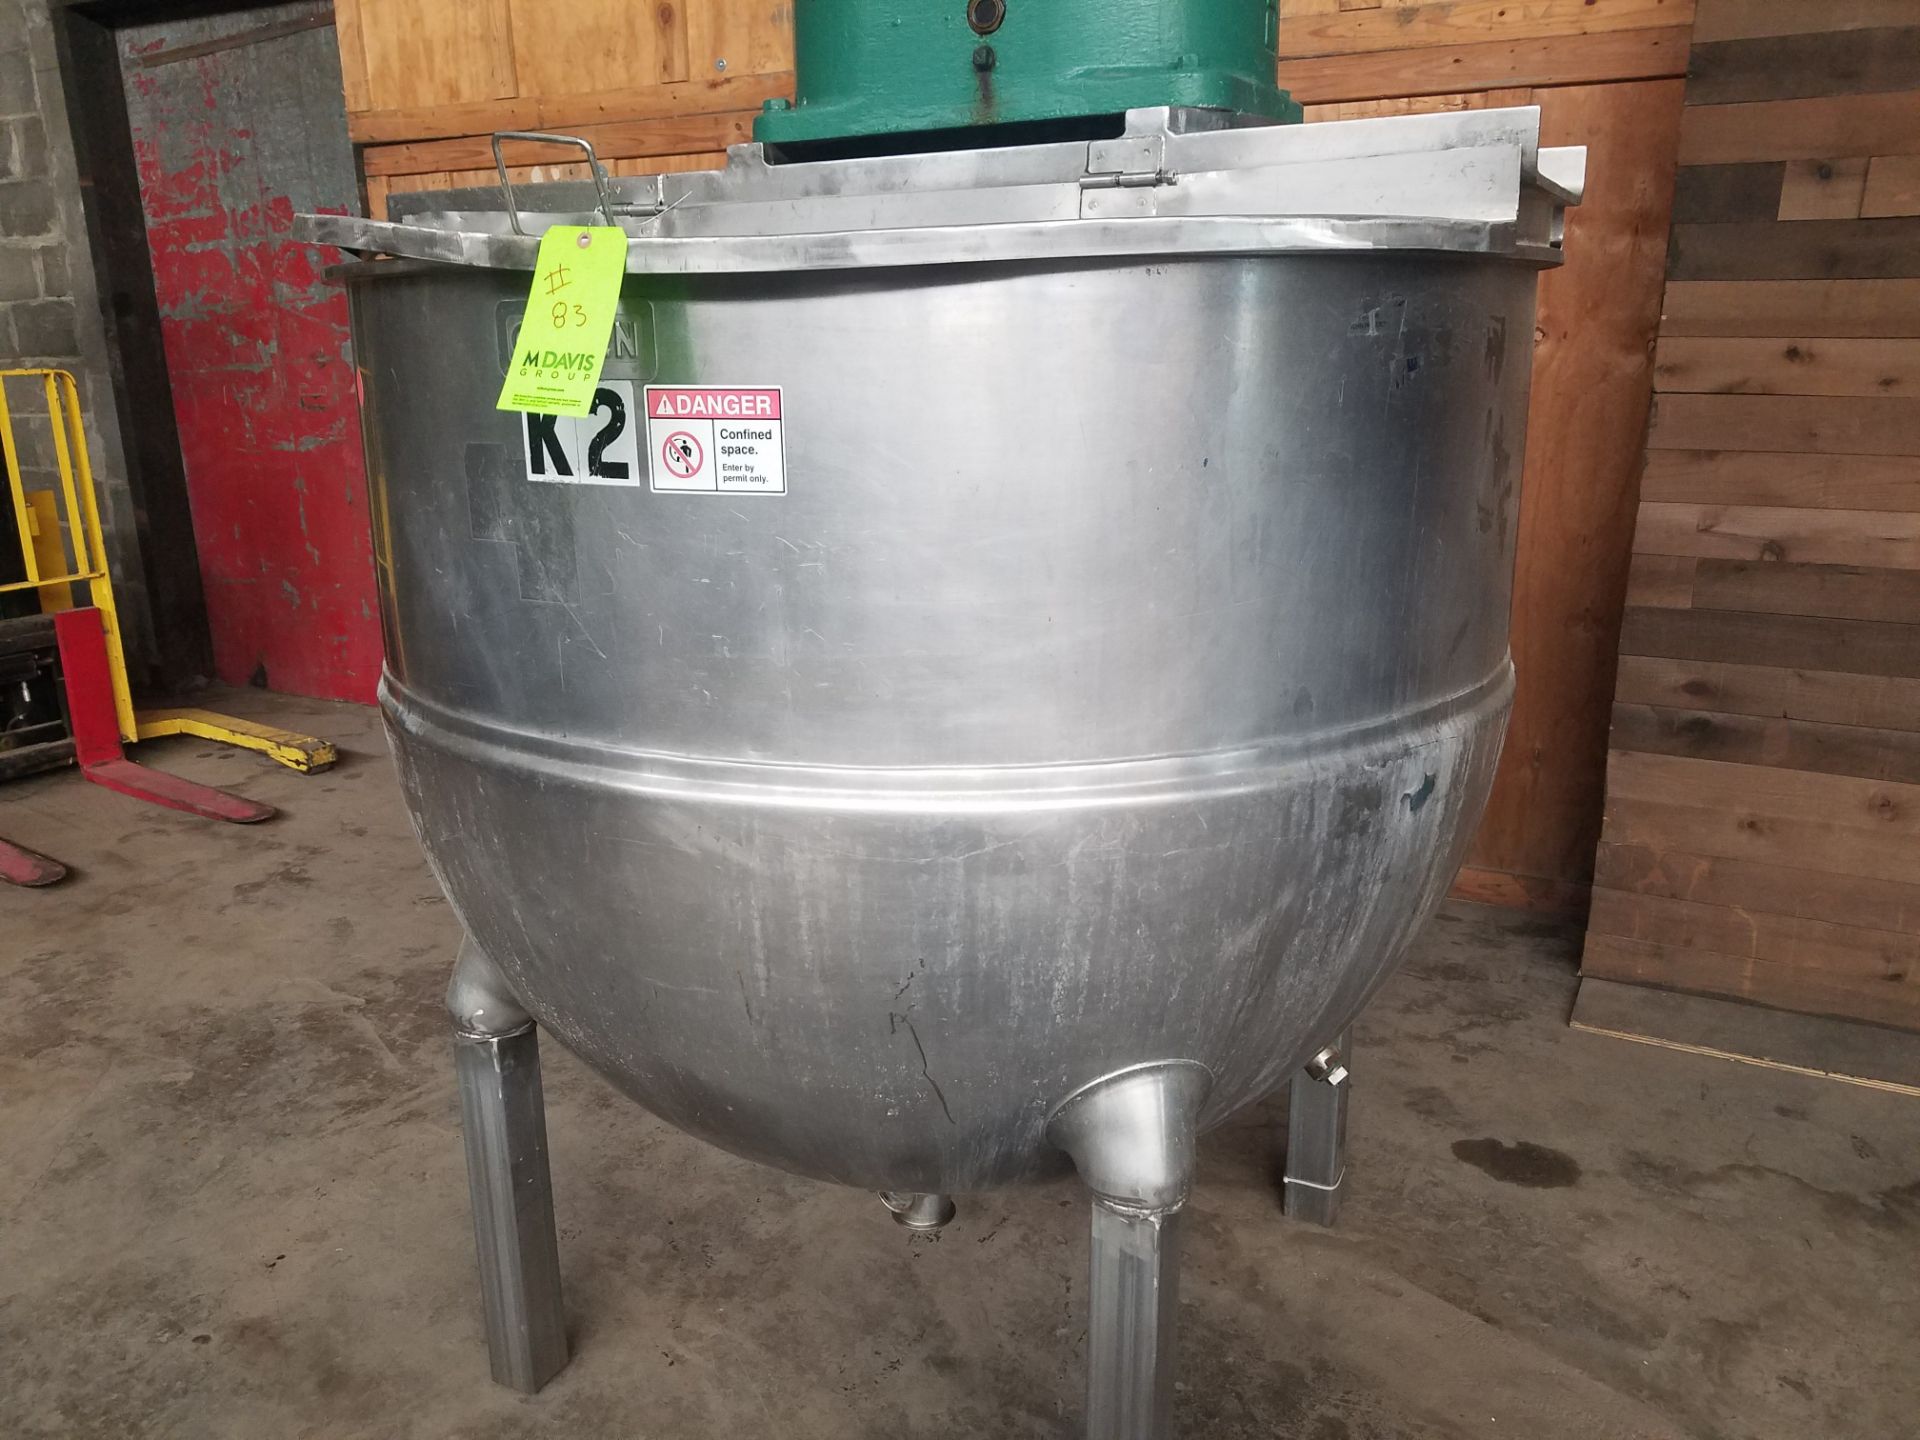 Groen TA-300 SP Stainless Steel Jacketed Kettle, Serial # 05685(Loading, Rigging & Site Management - Image 2 of 4